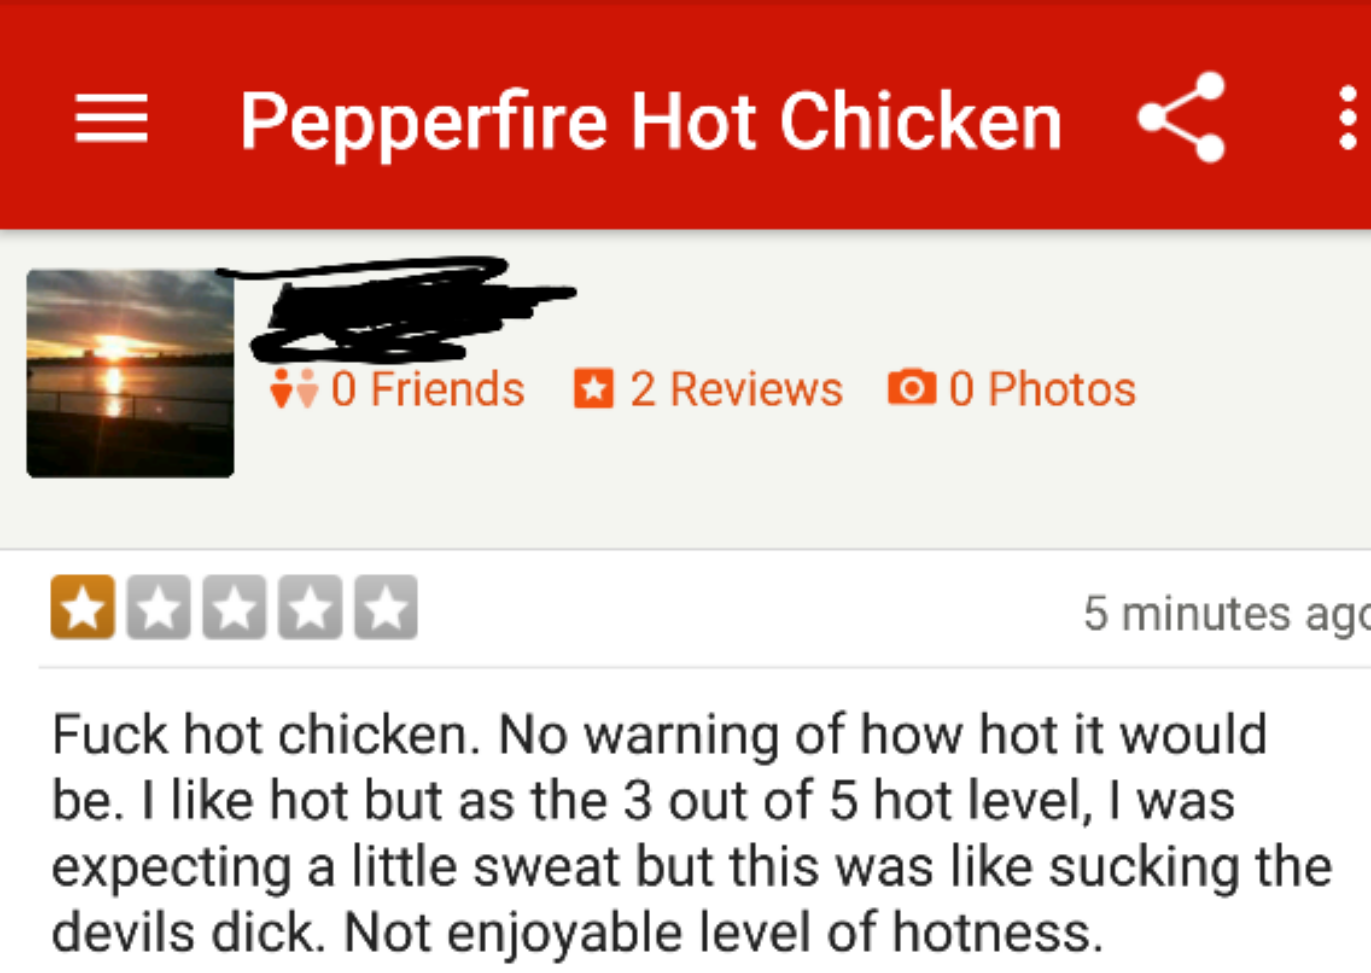 My cousins review of a hot chicken place in Nashville.